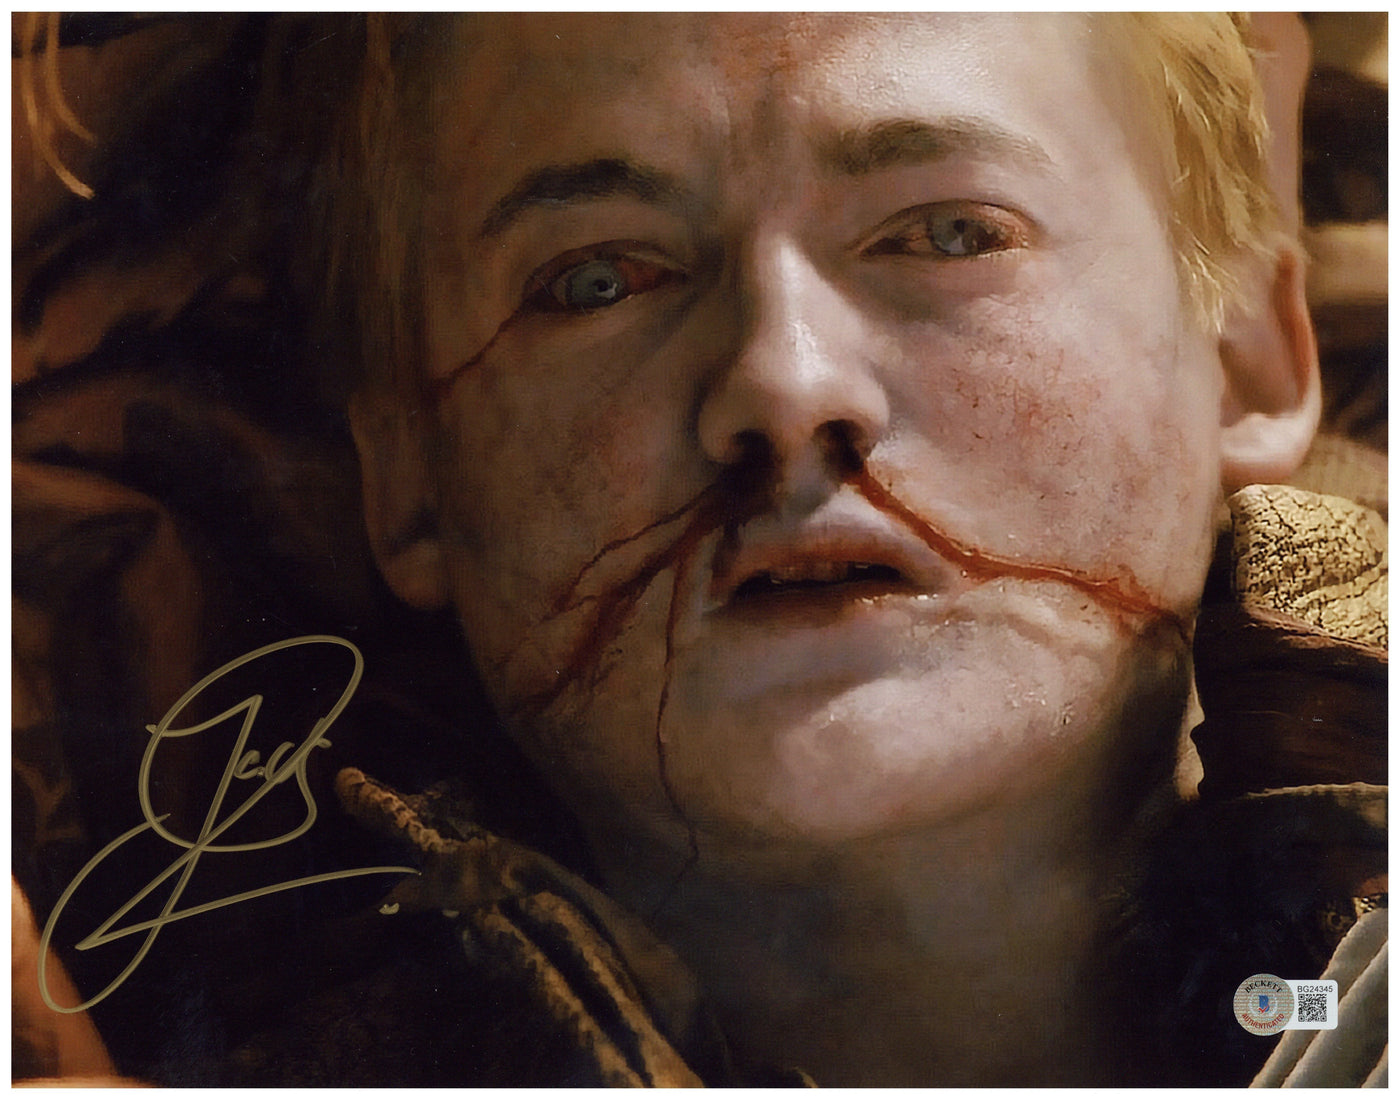 JACK GLEESON SIGNED 11X14 PHOTO GAME OF THRONES JOFFREY AUTOGRAPHED BAS #2